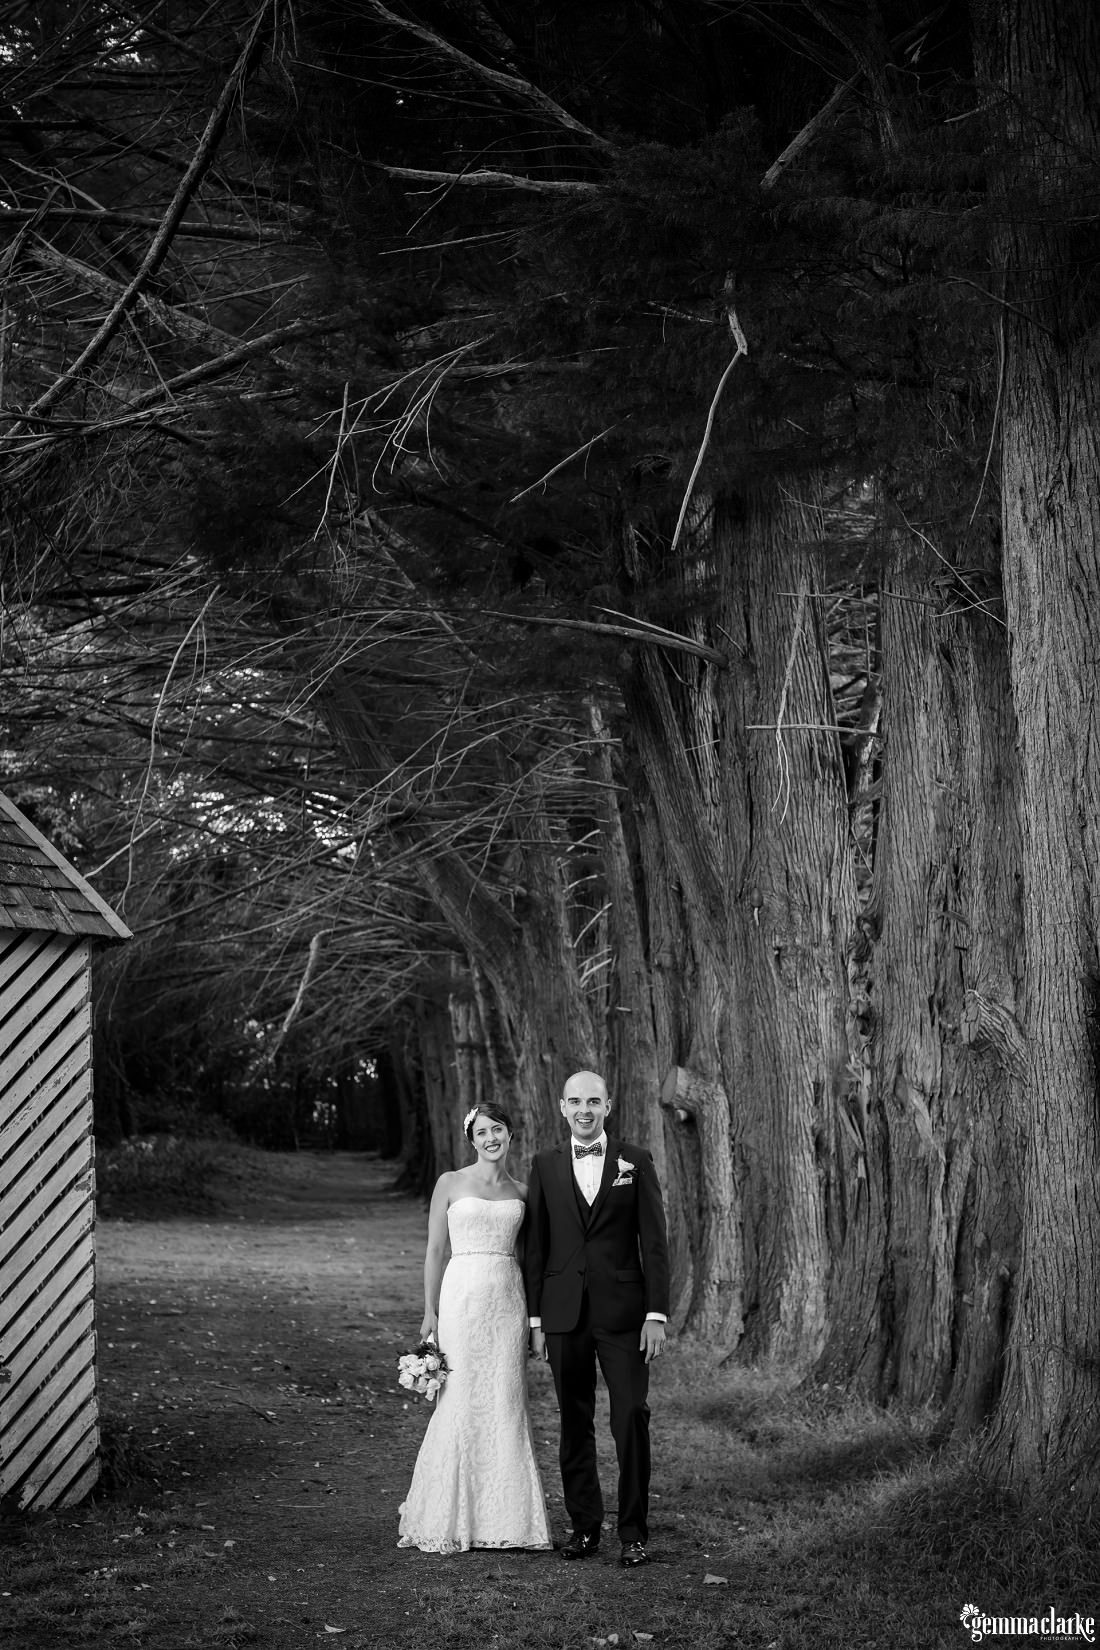 A bride and groom holding hands and smiling next to some very large trees